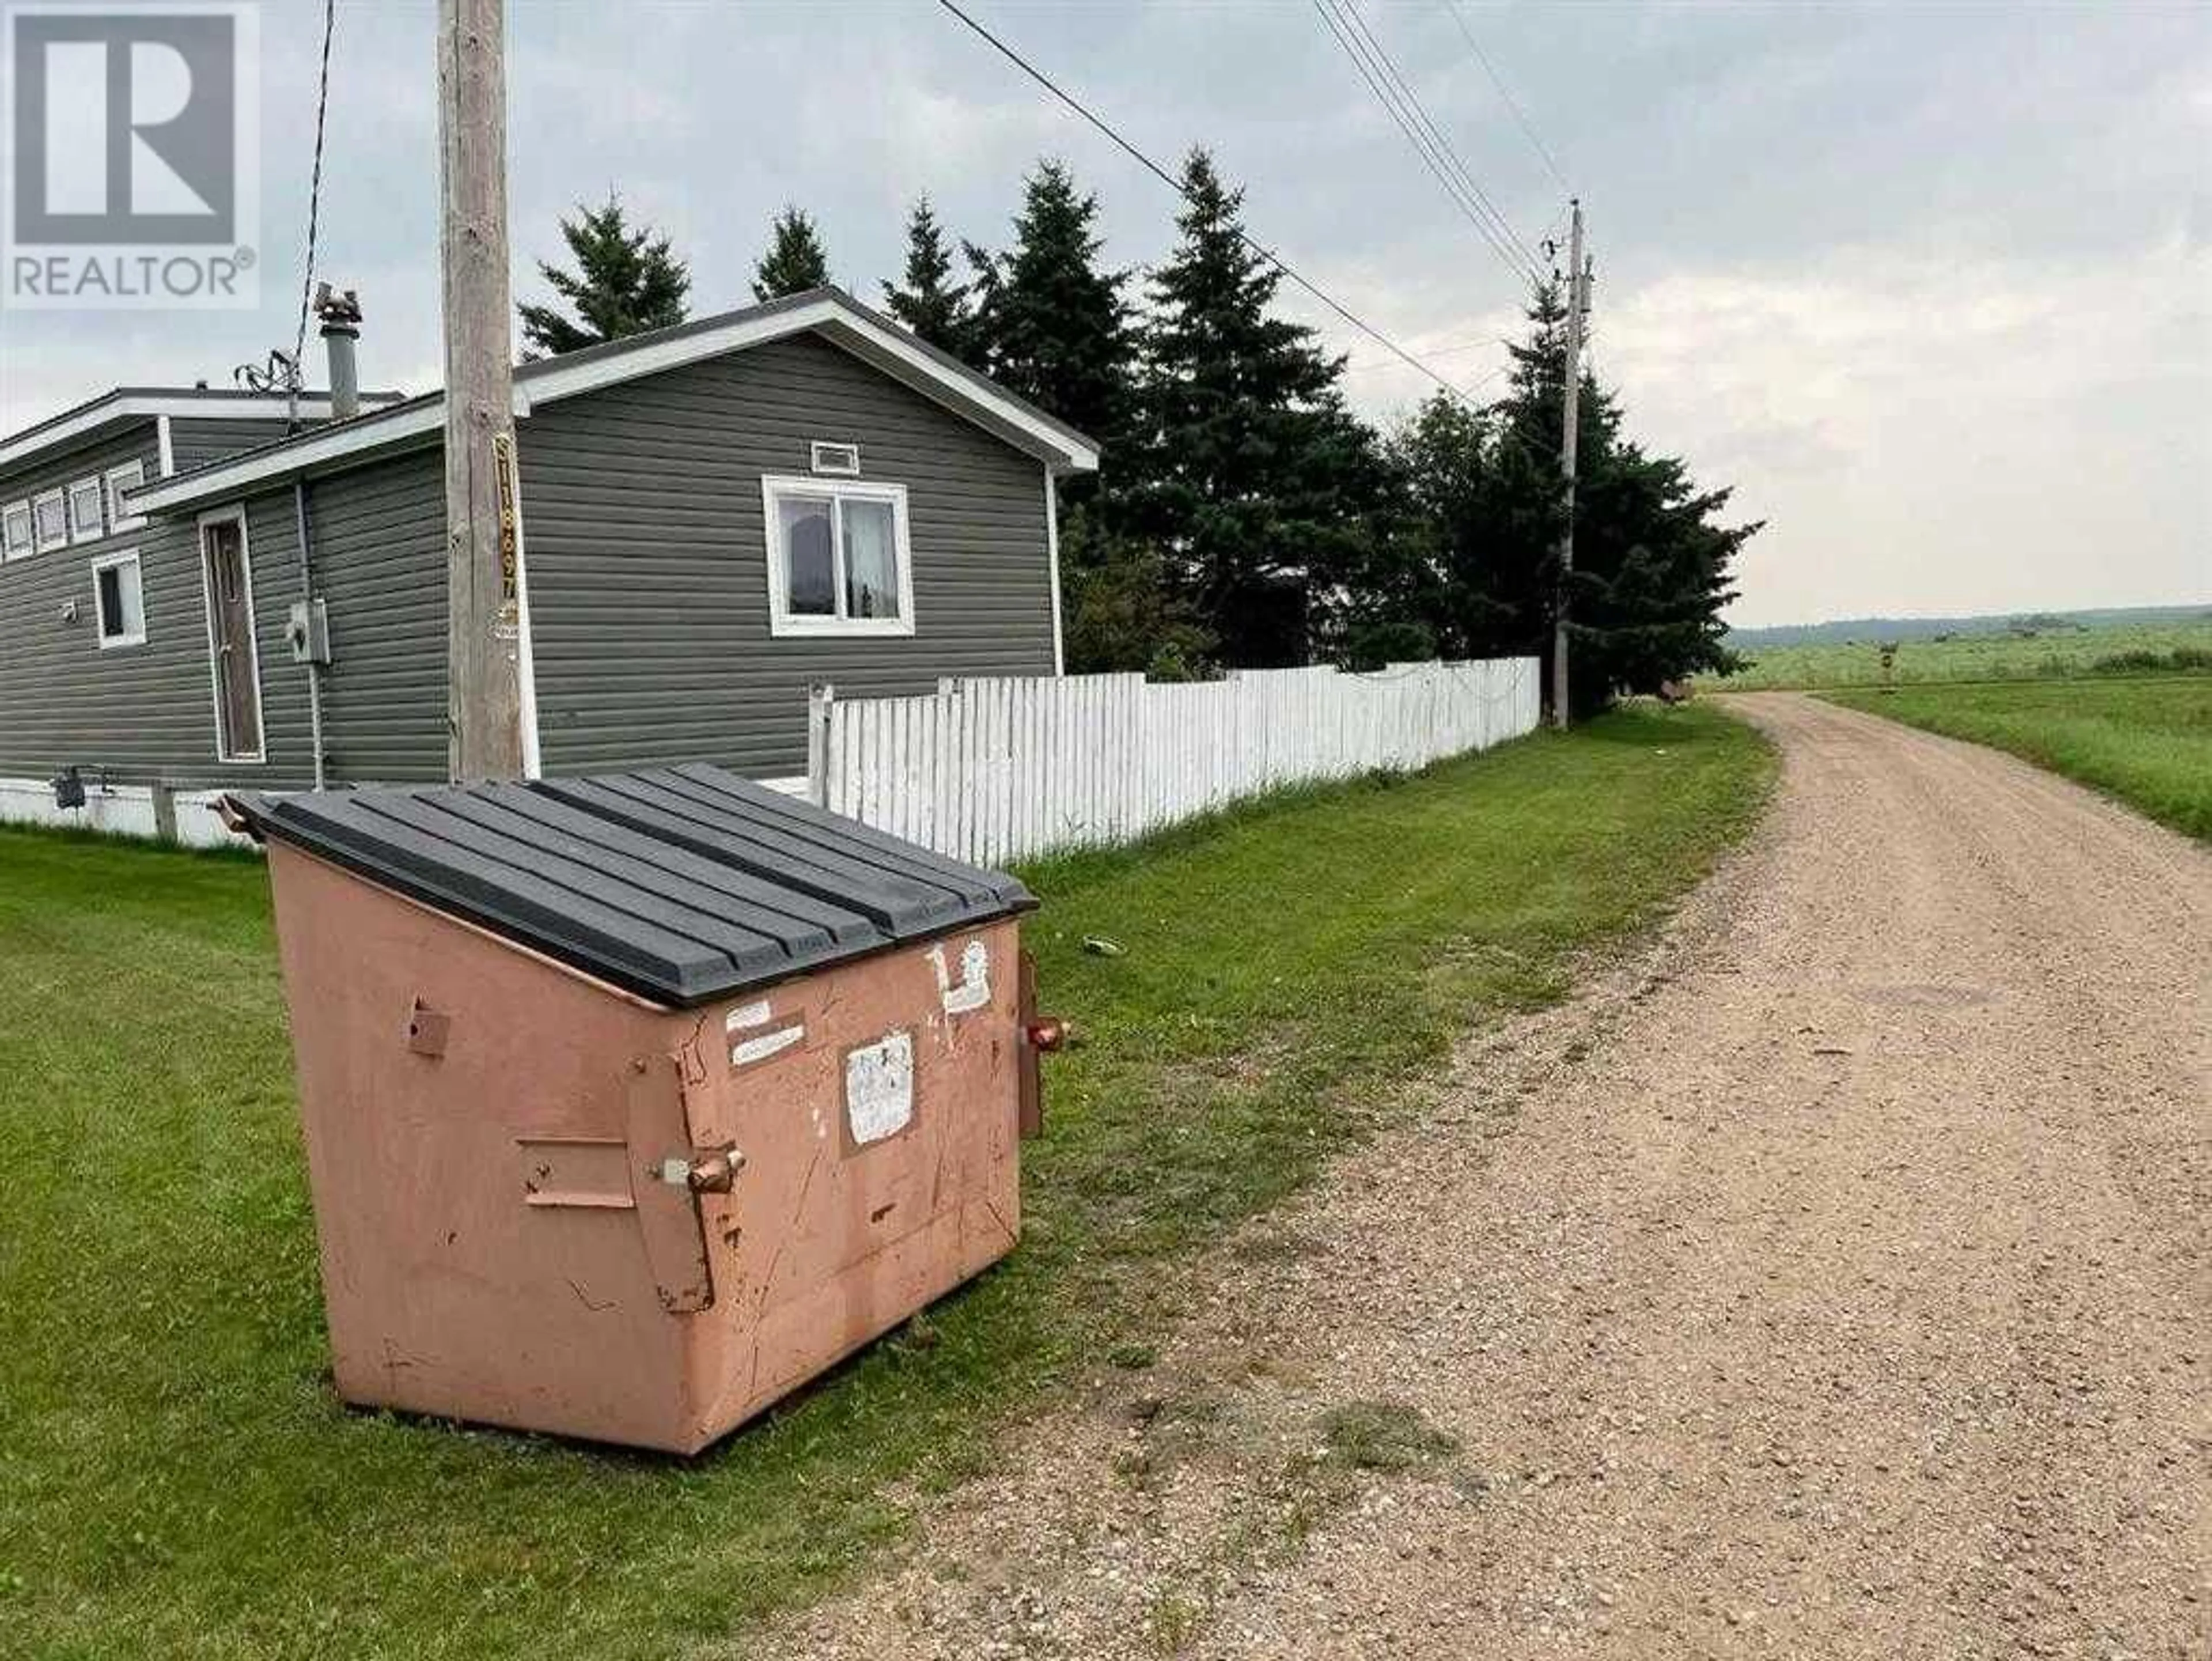 Shed for 4608 56 Street, Two Hills Alberta T0B2K0